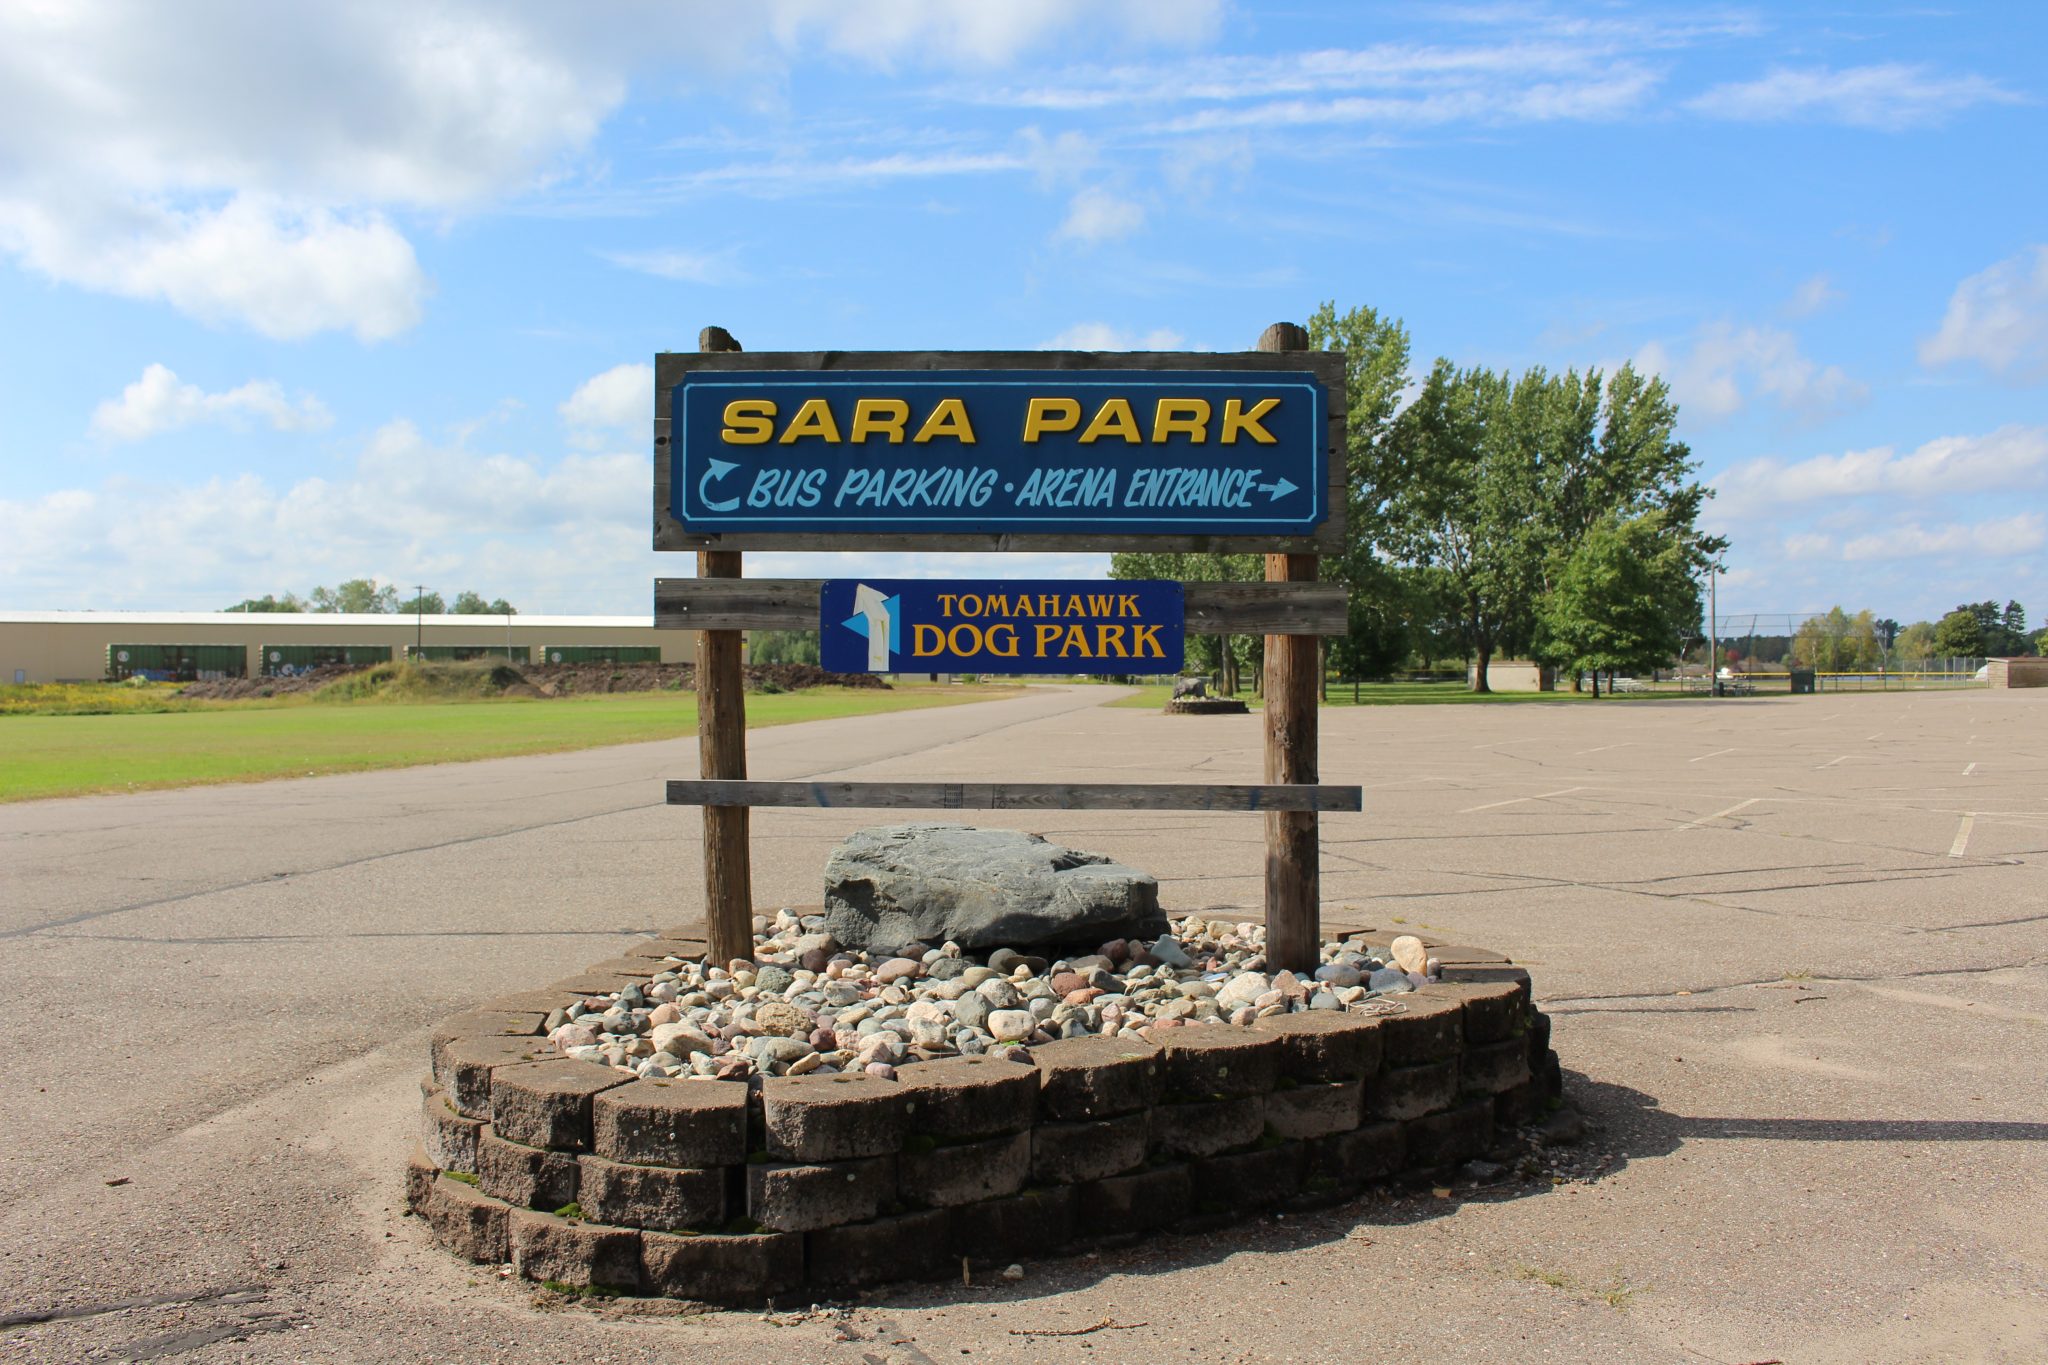 Free COVID-19 testing available at SARA Park in Tomahawk Thursday, Oct. 1